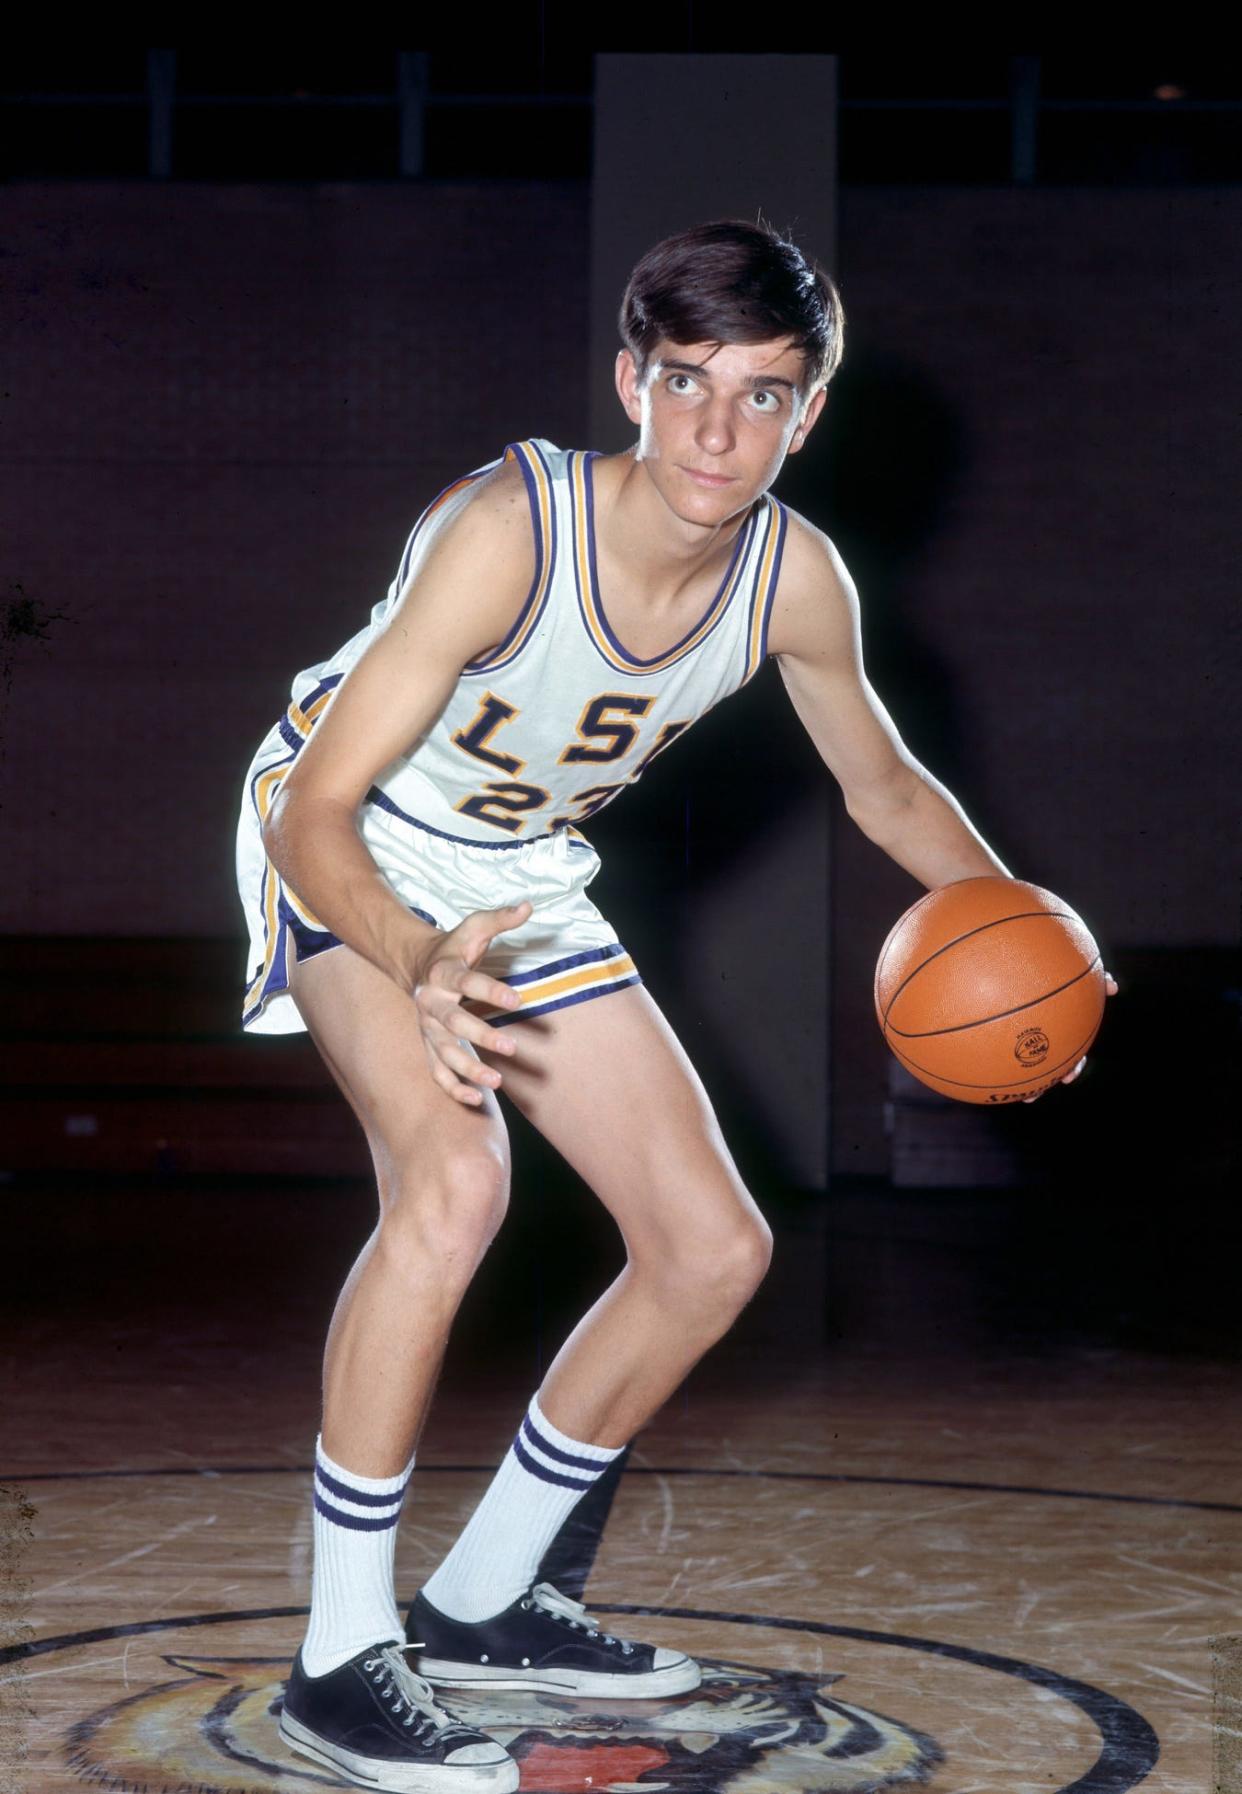 Pete Maravich played guard at LSU, leading the nation in scoring in all three of his seasons and averaging over 44 points per game.